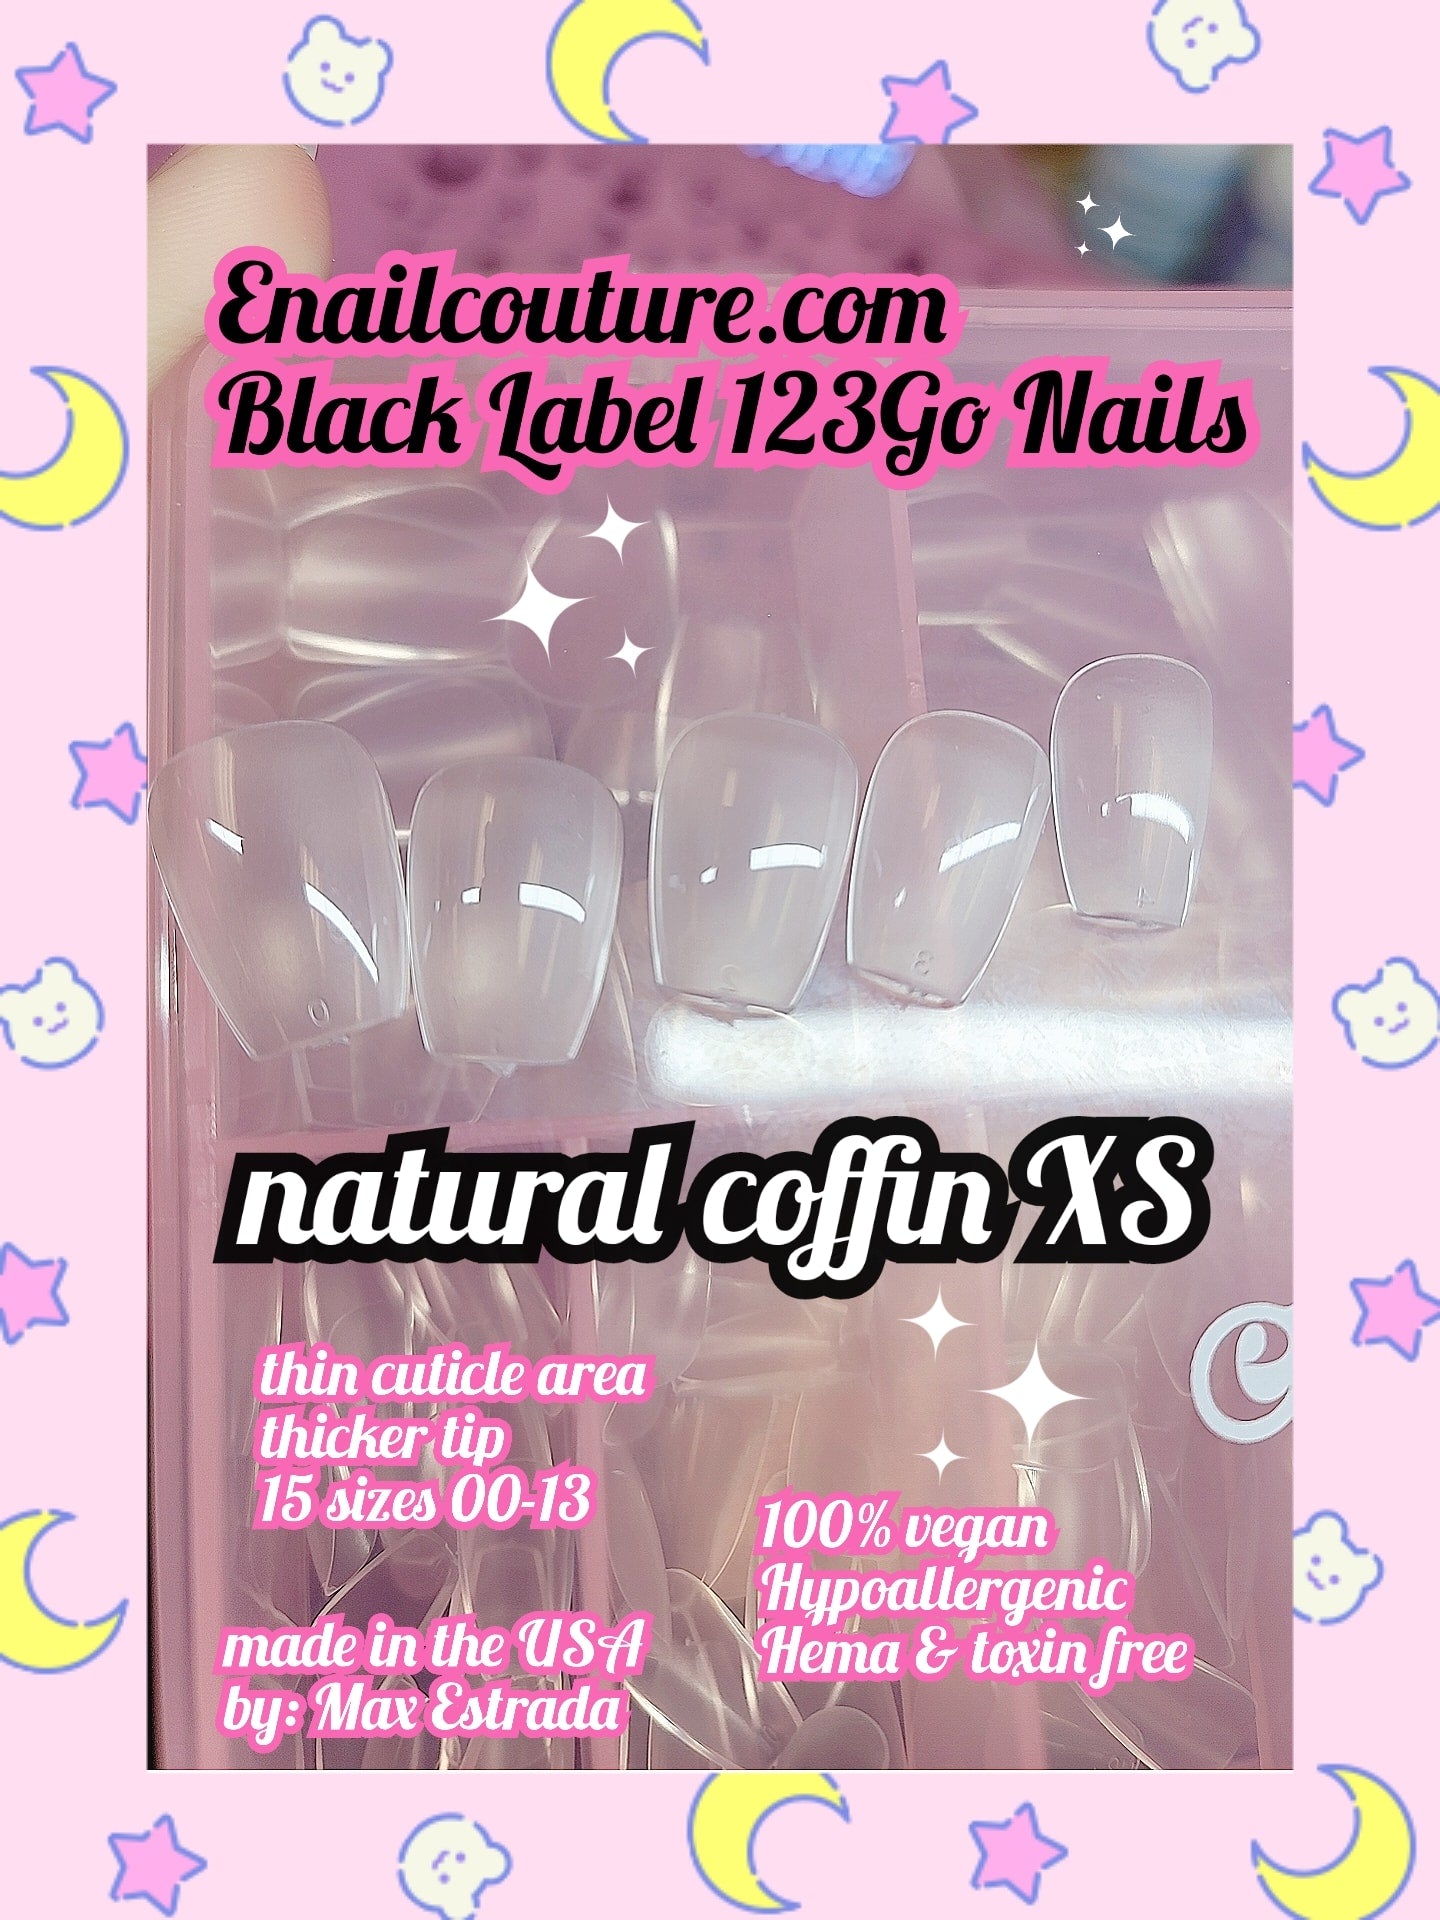 123go Black Label Nails natural coffin XS (Soft Gel Nail Tips- Clear Cover Full Nail Extensions - Pre-shaped Acrylic False Gelly Nail Tips 15 Sizes for DIY Salon Nail Extensions)